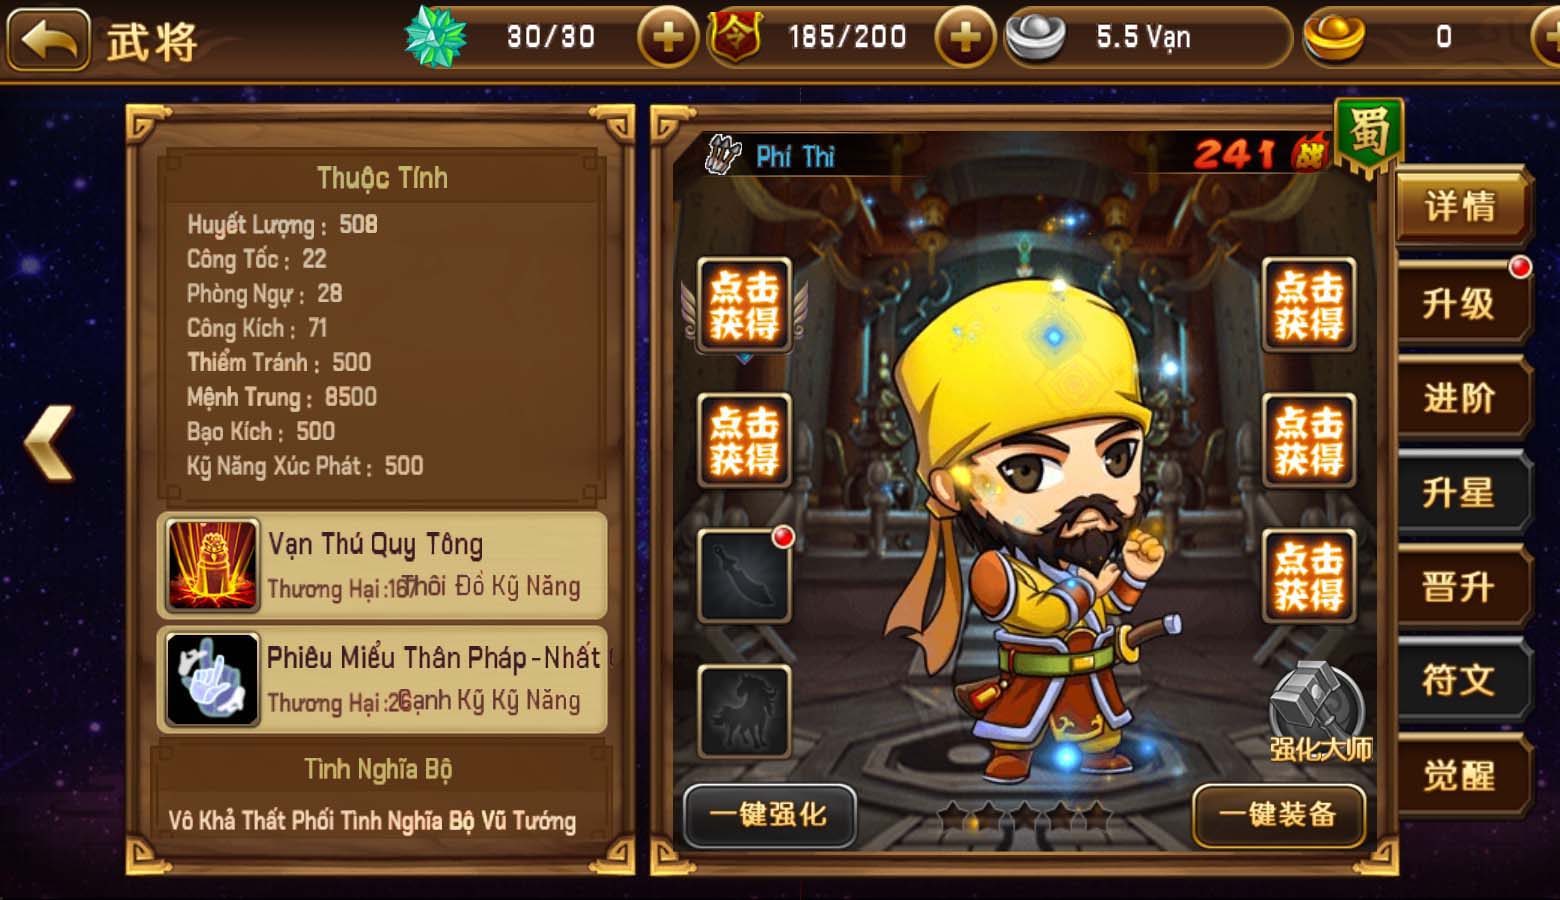 Tmgame99 Tam Quoc Thu Thanh